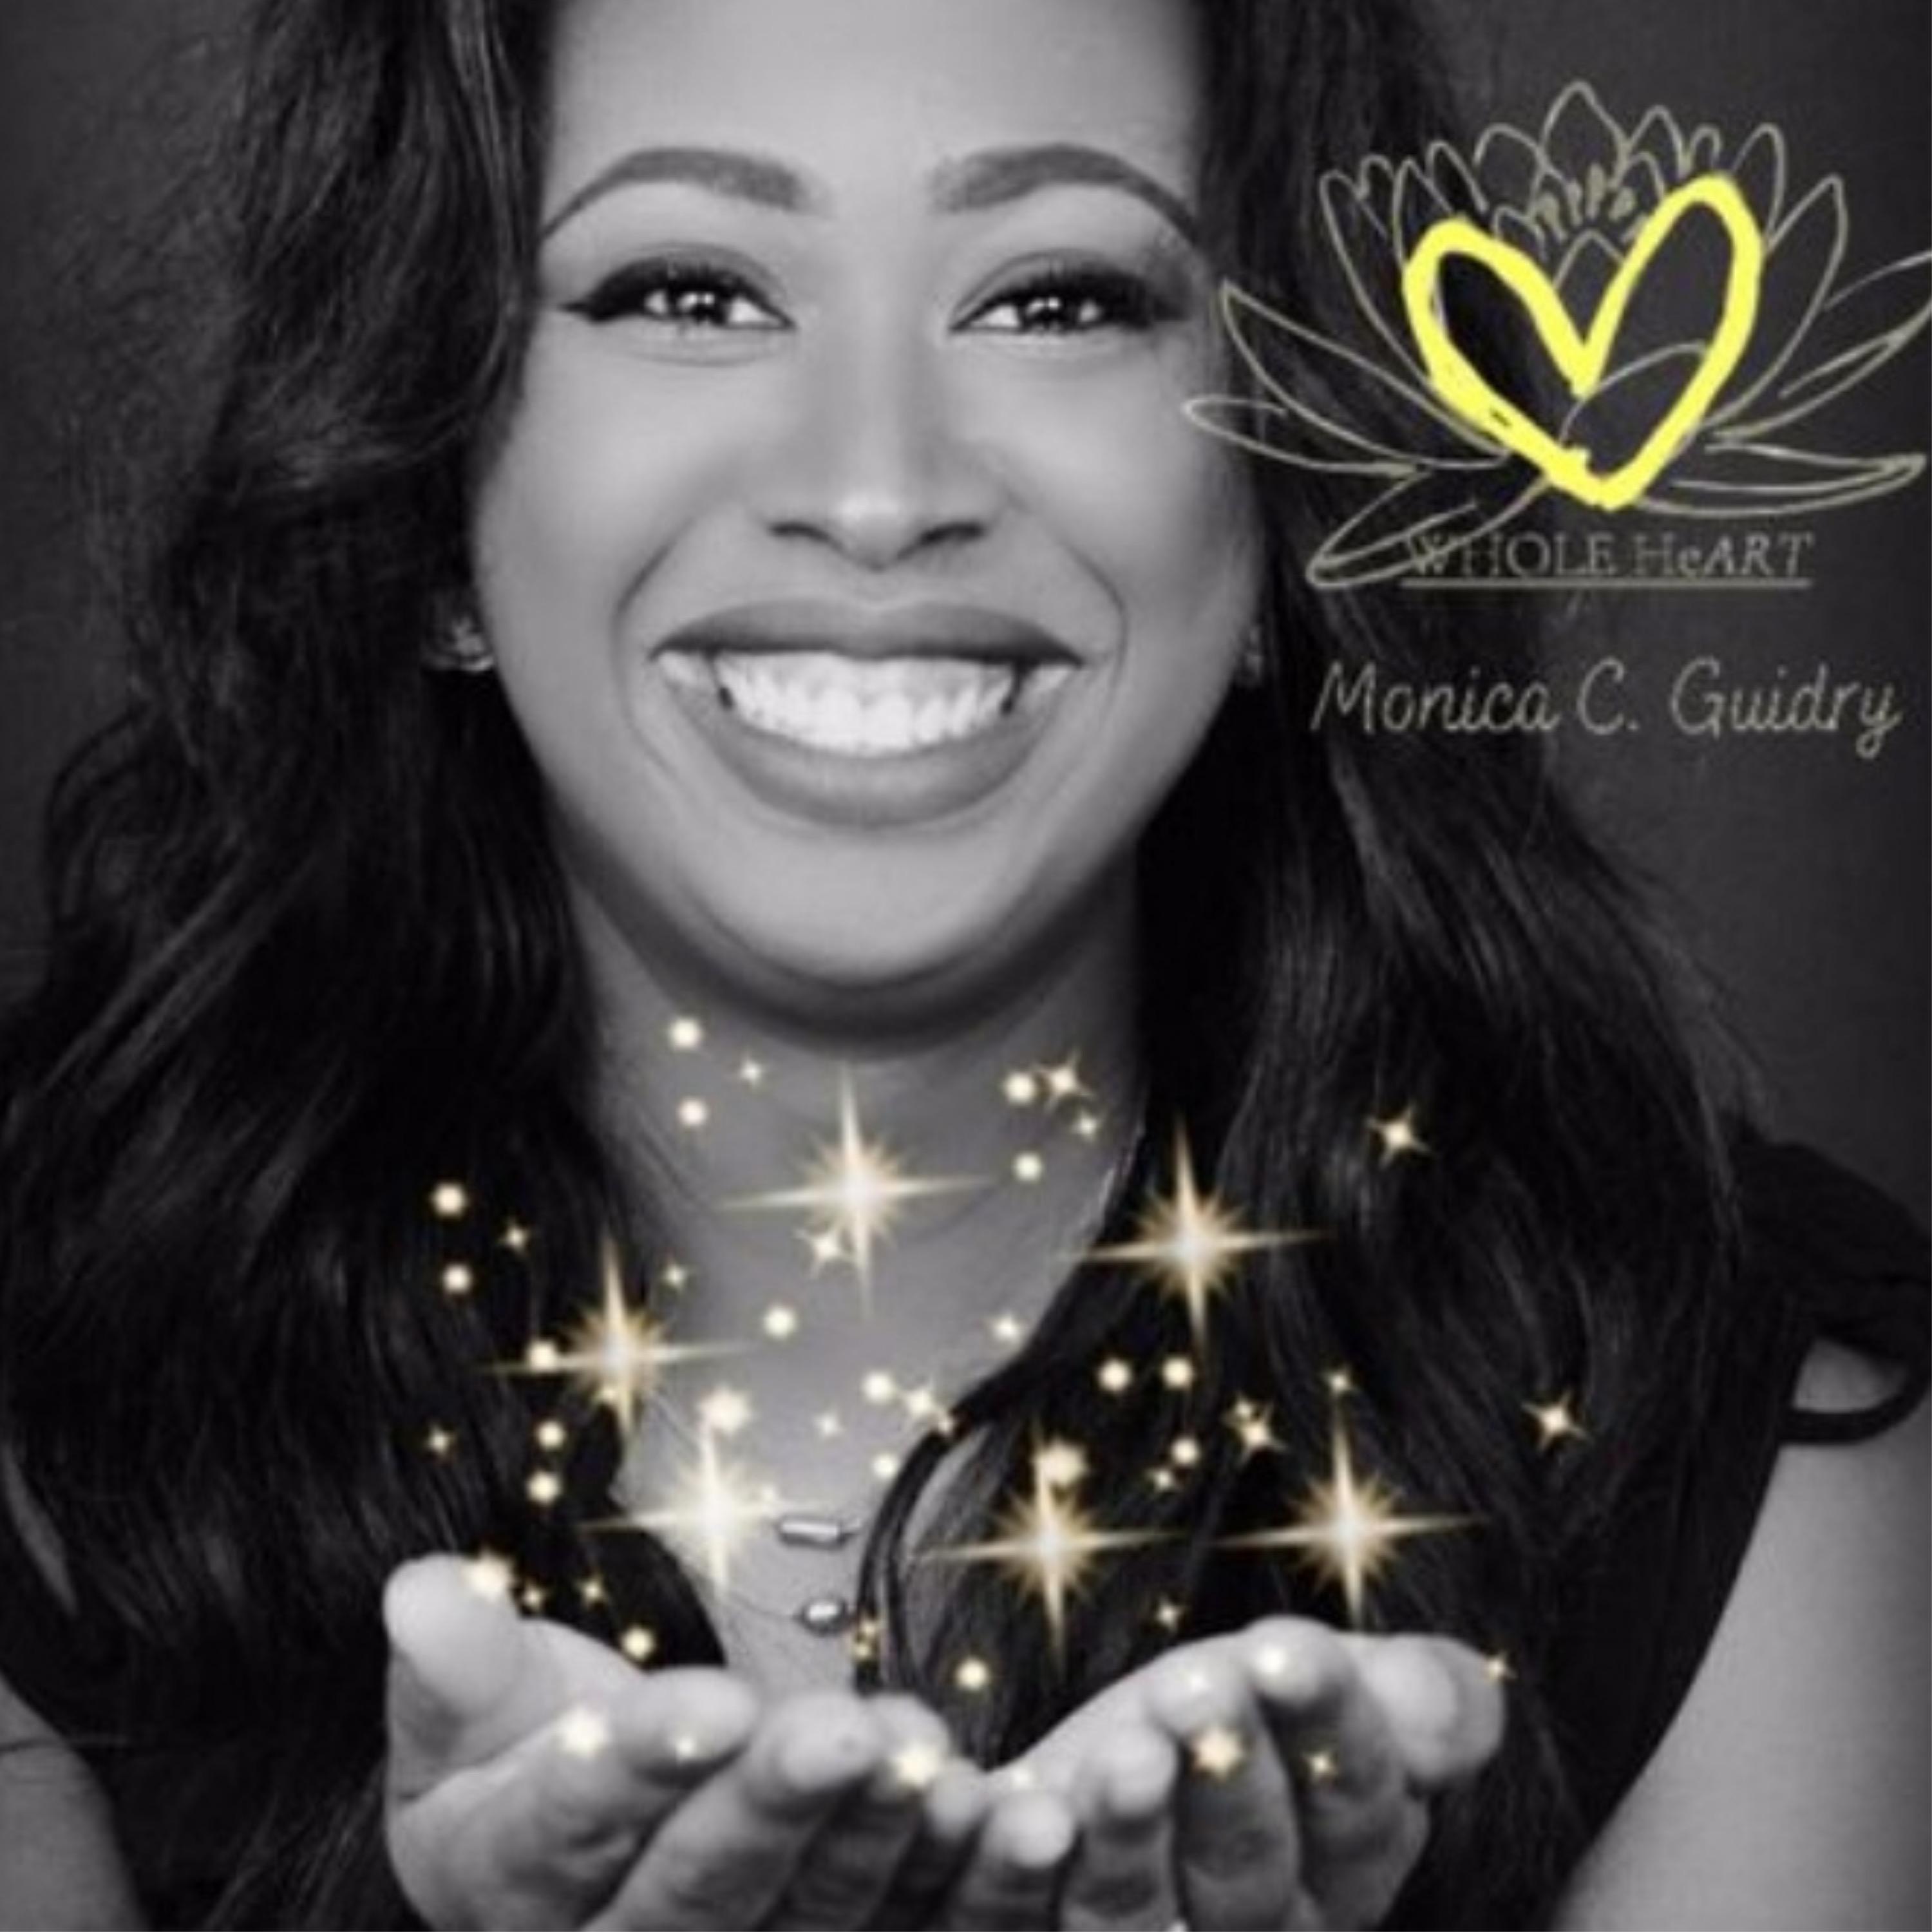 WHOLE HeART: with Monica C. Guidry